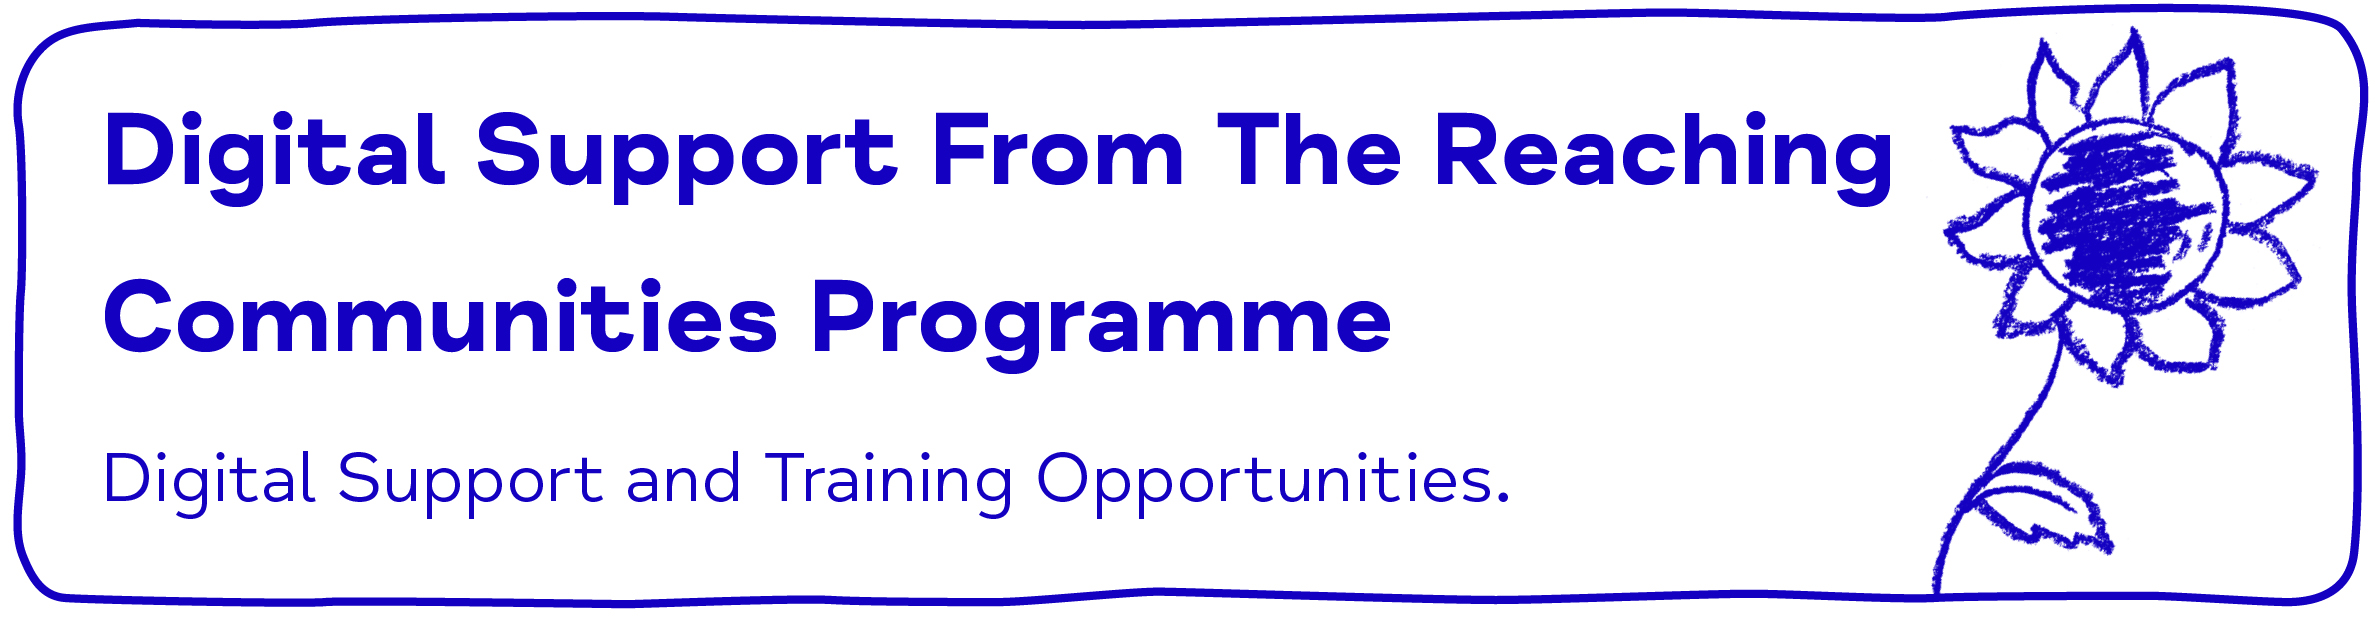 Digital Support From The Reaching Communities Programme. Digital Support and Training Opportunities. 